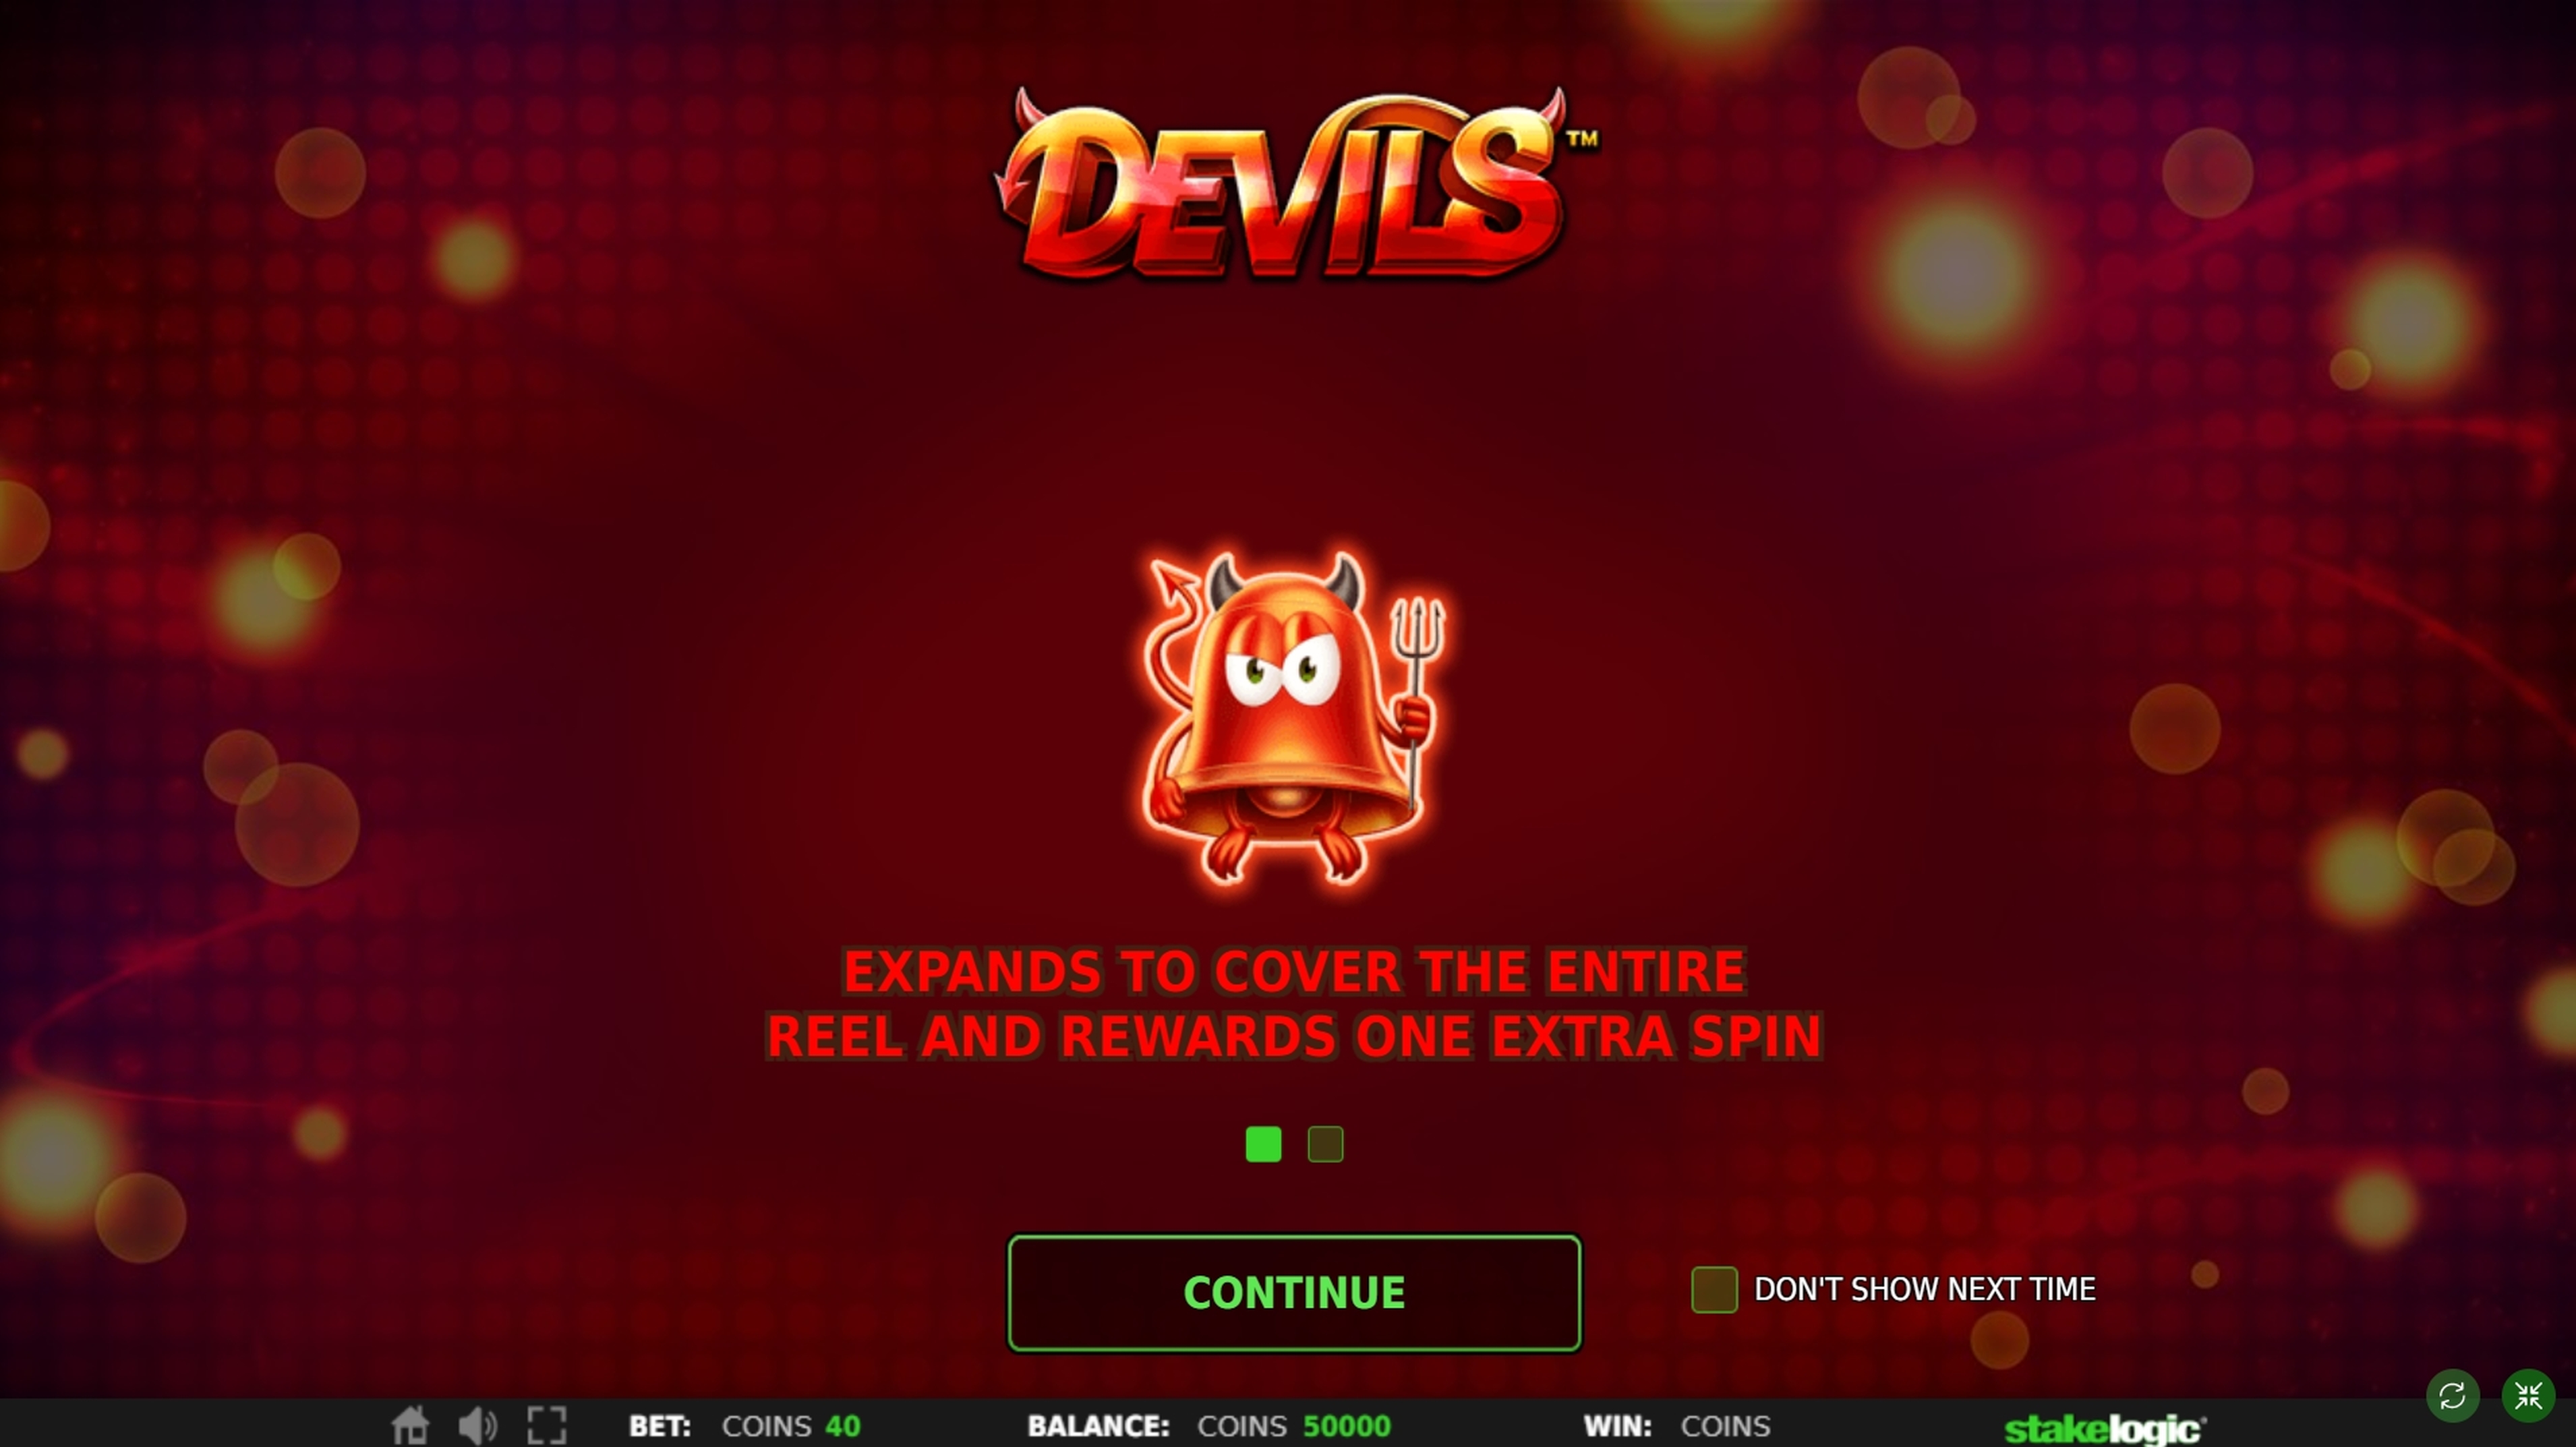 Play Devils Free Casino Slot Game by Stakelogic